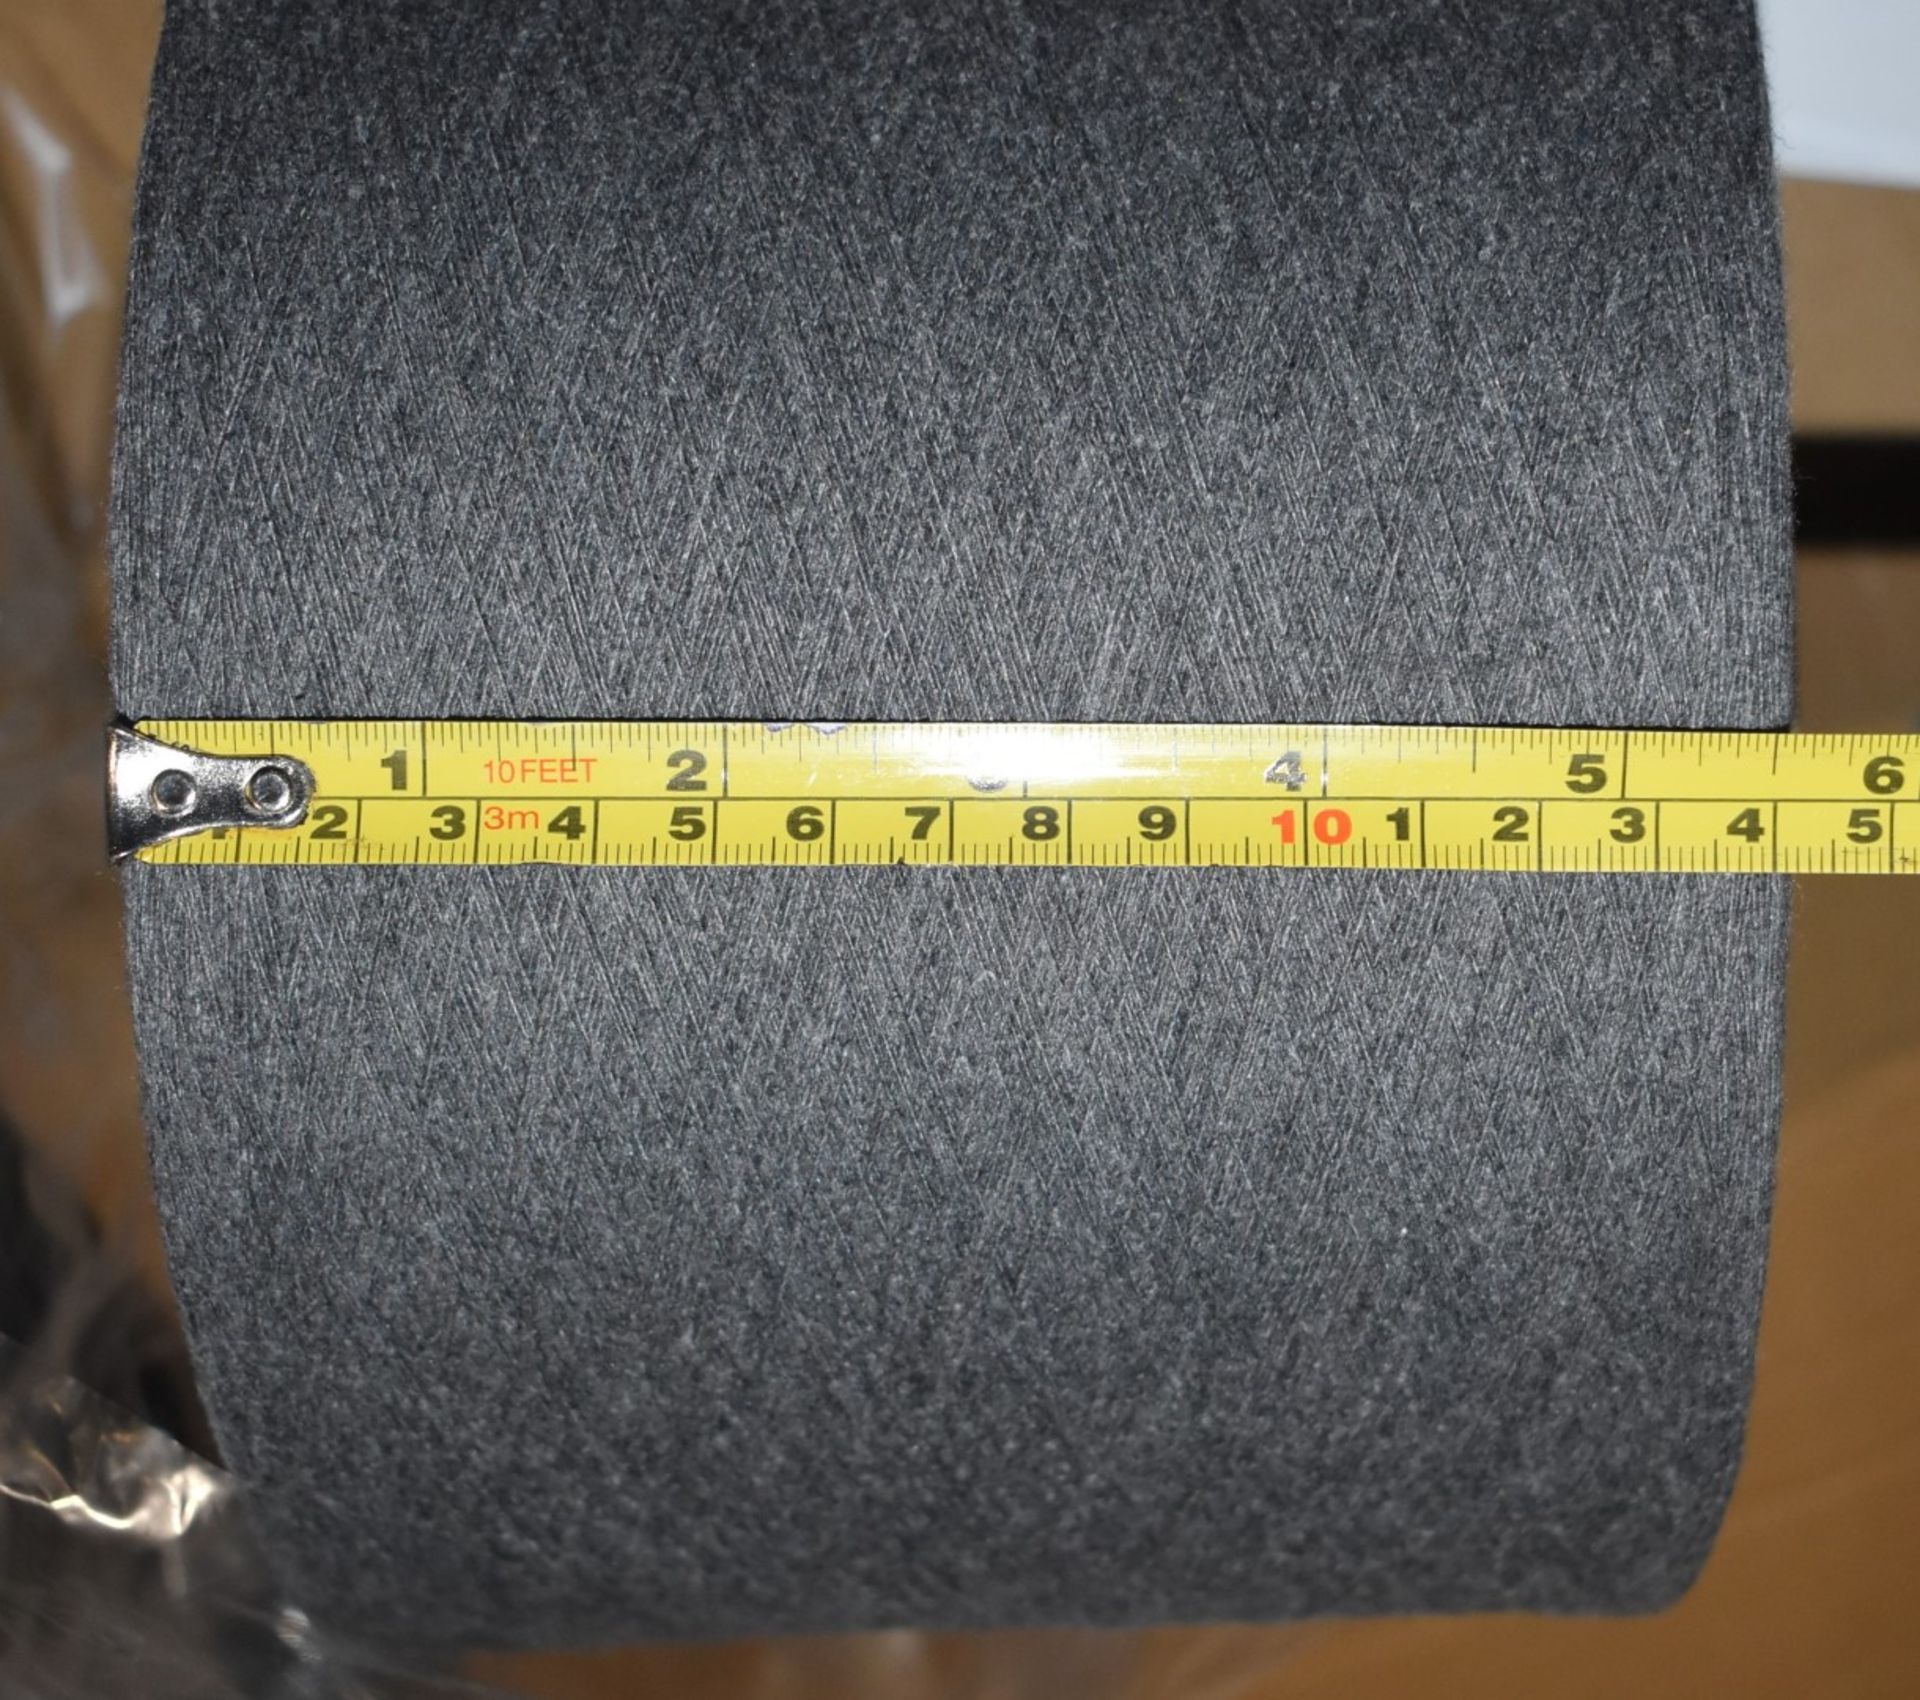 1 x Cone of 1/13 MicroCotton Knitting Yarn - Mid Grey - Approx Weight: 2,500g - New Stock ABL Yarn - Image 12 of 18